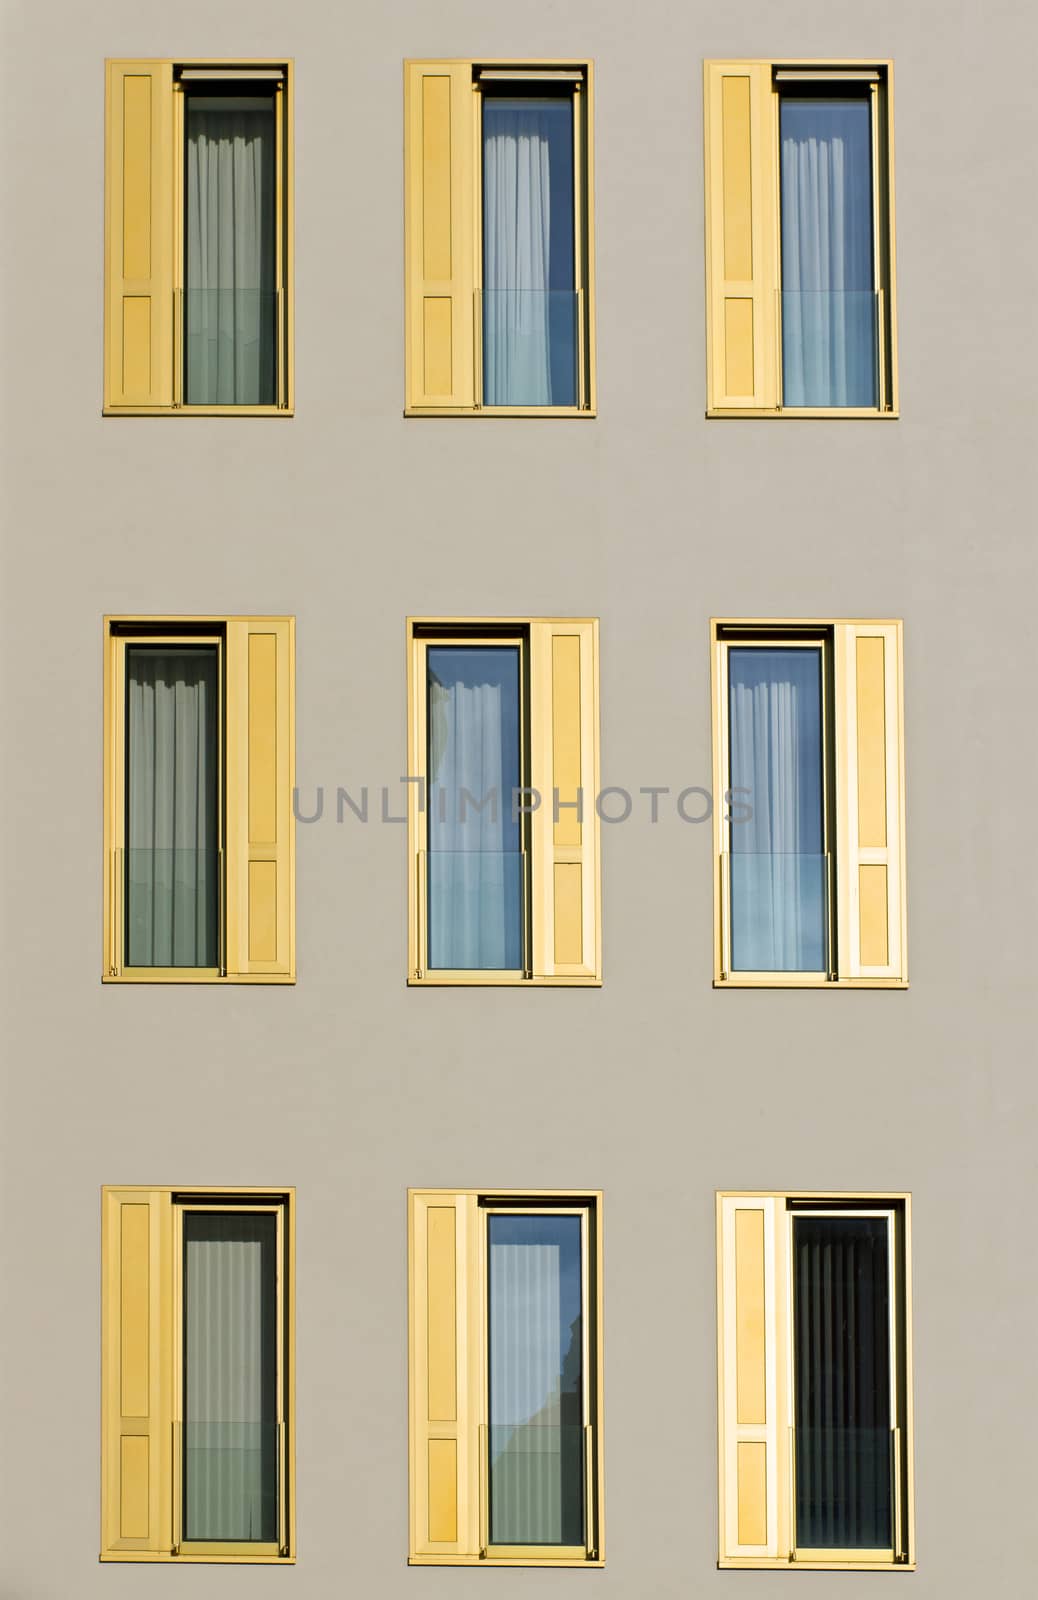 A hotel facade with golden window shutters